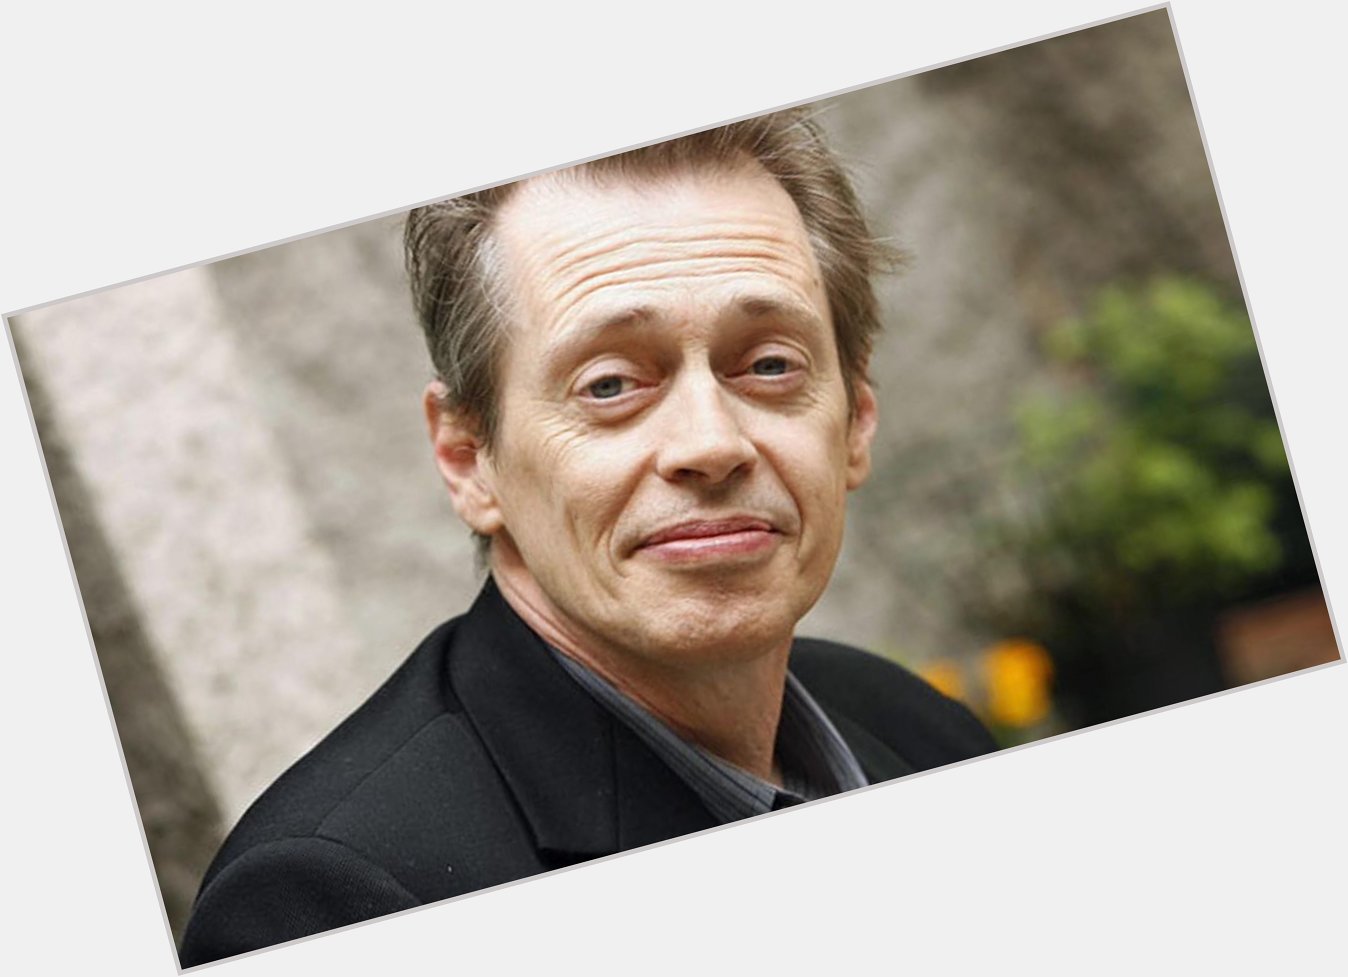 HAPPY BIRTHDAY to SUPER BADASS AMERICAN ACTOR, WRITER, DIRECTOR, and 9/11 FDNY ENGINE 55 HERO STEVE BUSCEMI 